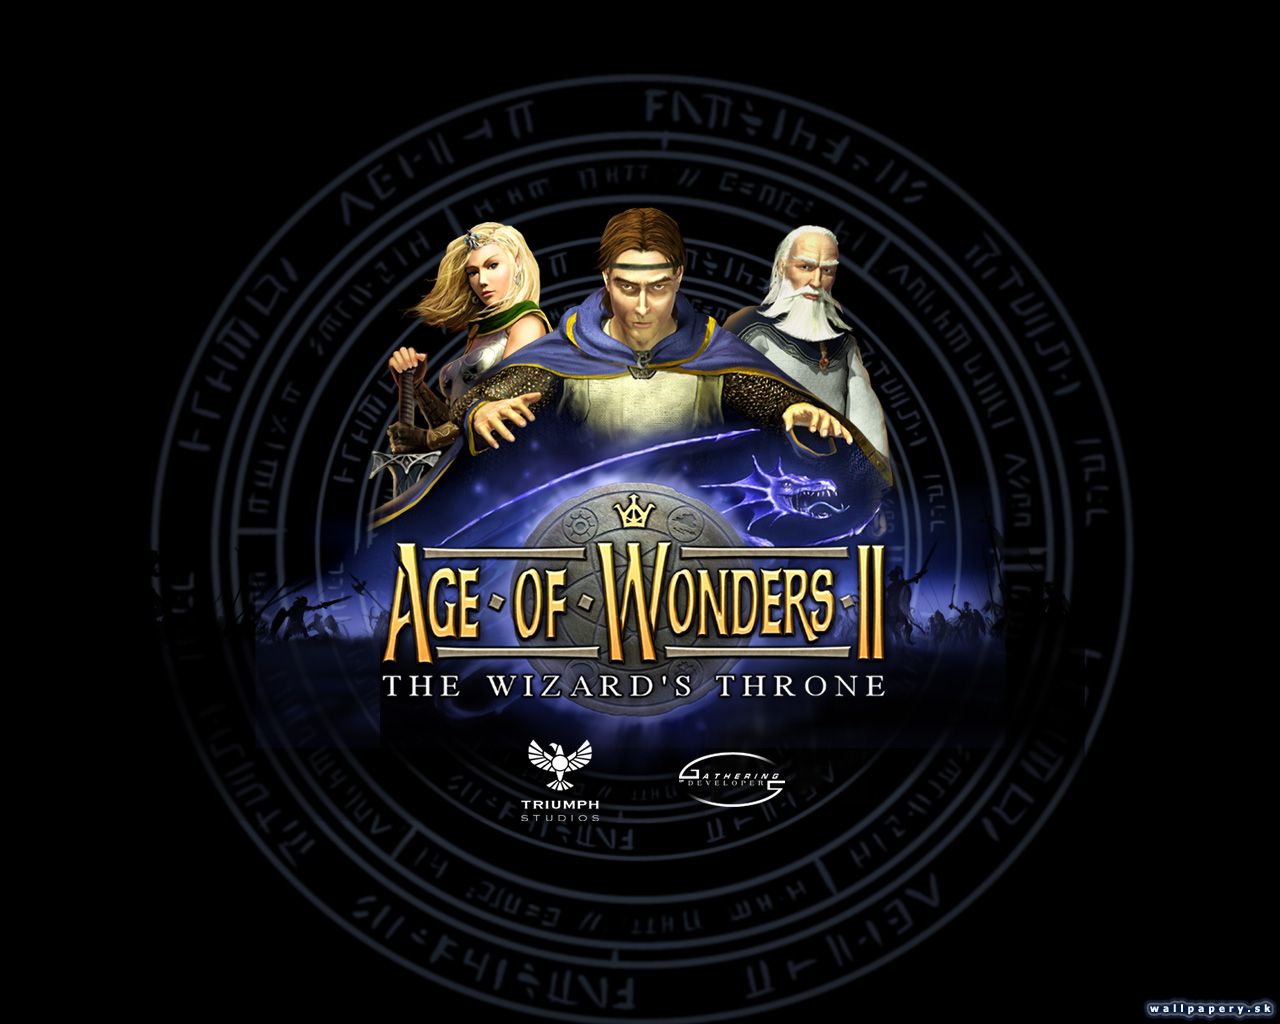 Age of Wonders 2: The Wizard's Throne - wallpaper 4